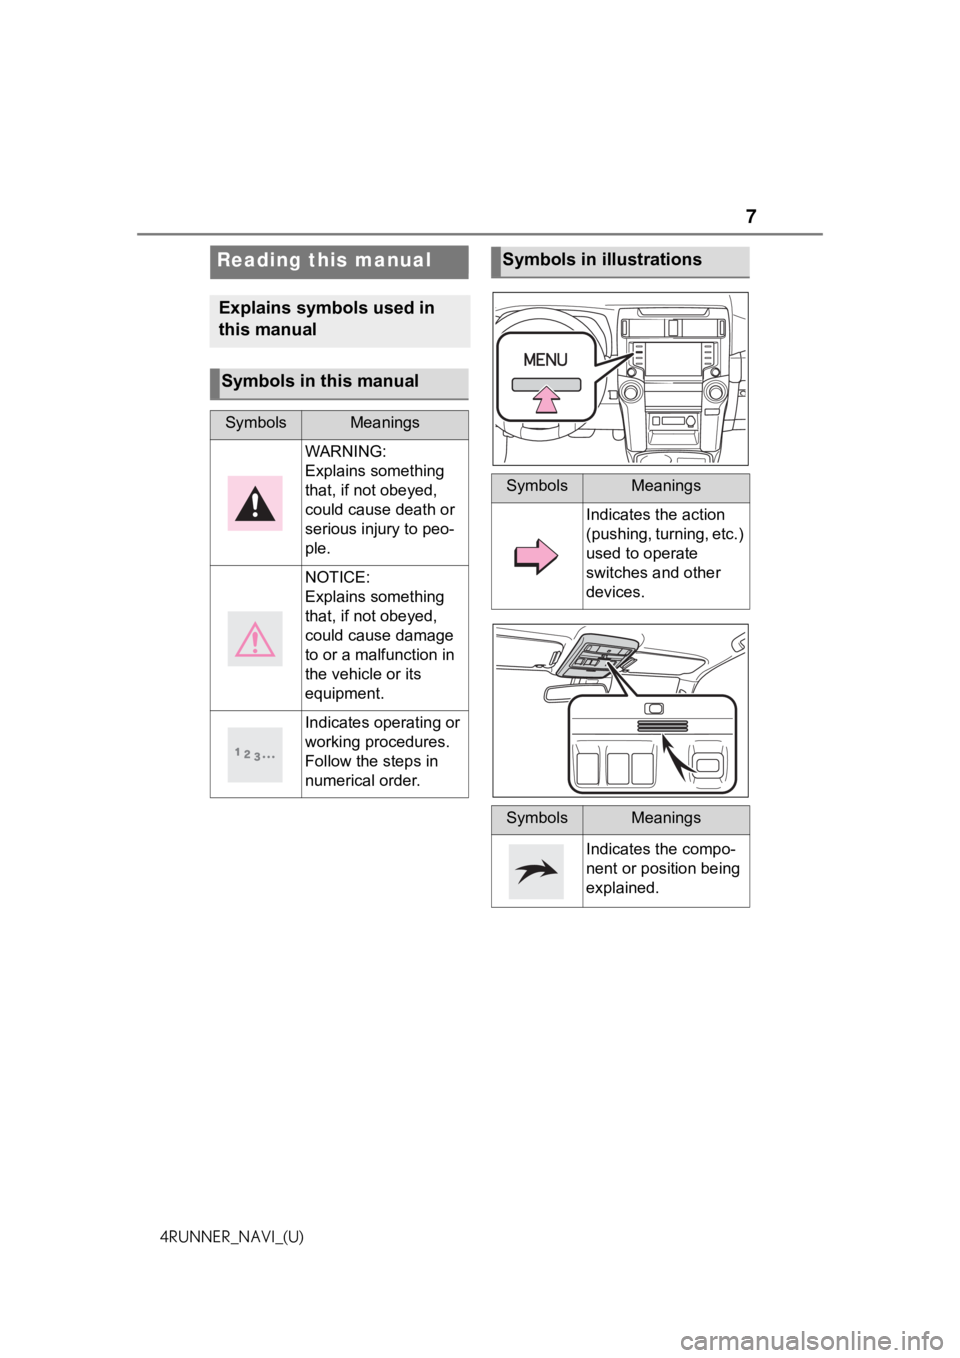 TOYOTA 4RUNNER 2021  Accessories, Audio & Navigation (in English) 7
4RUNNER_NAVI_(U)
Reading this manual
Explains symbols used in 
this manual
Symbols in this manual
SymbolsMeanings
WARNING:
Explains something 
that, if not obeyed, 
could cause death or 
serious inj